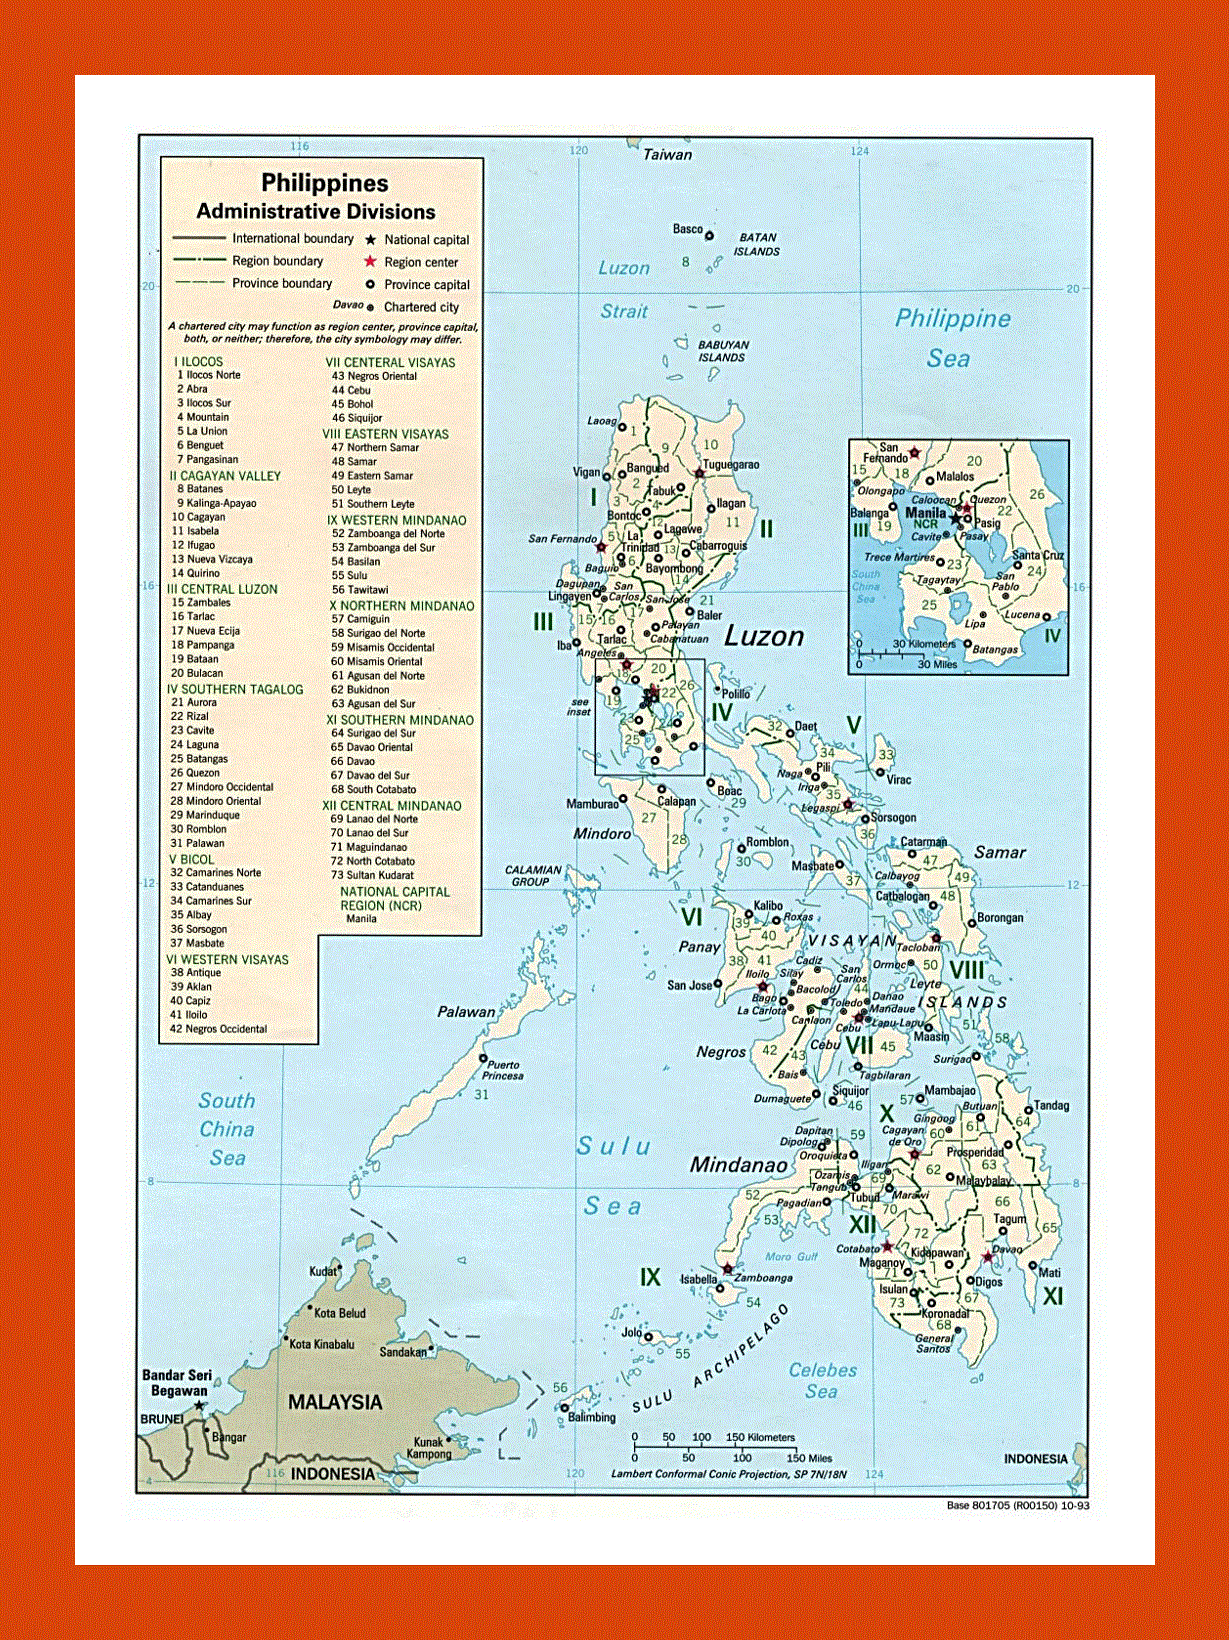 Administrative divisions map of Philippines - 1993